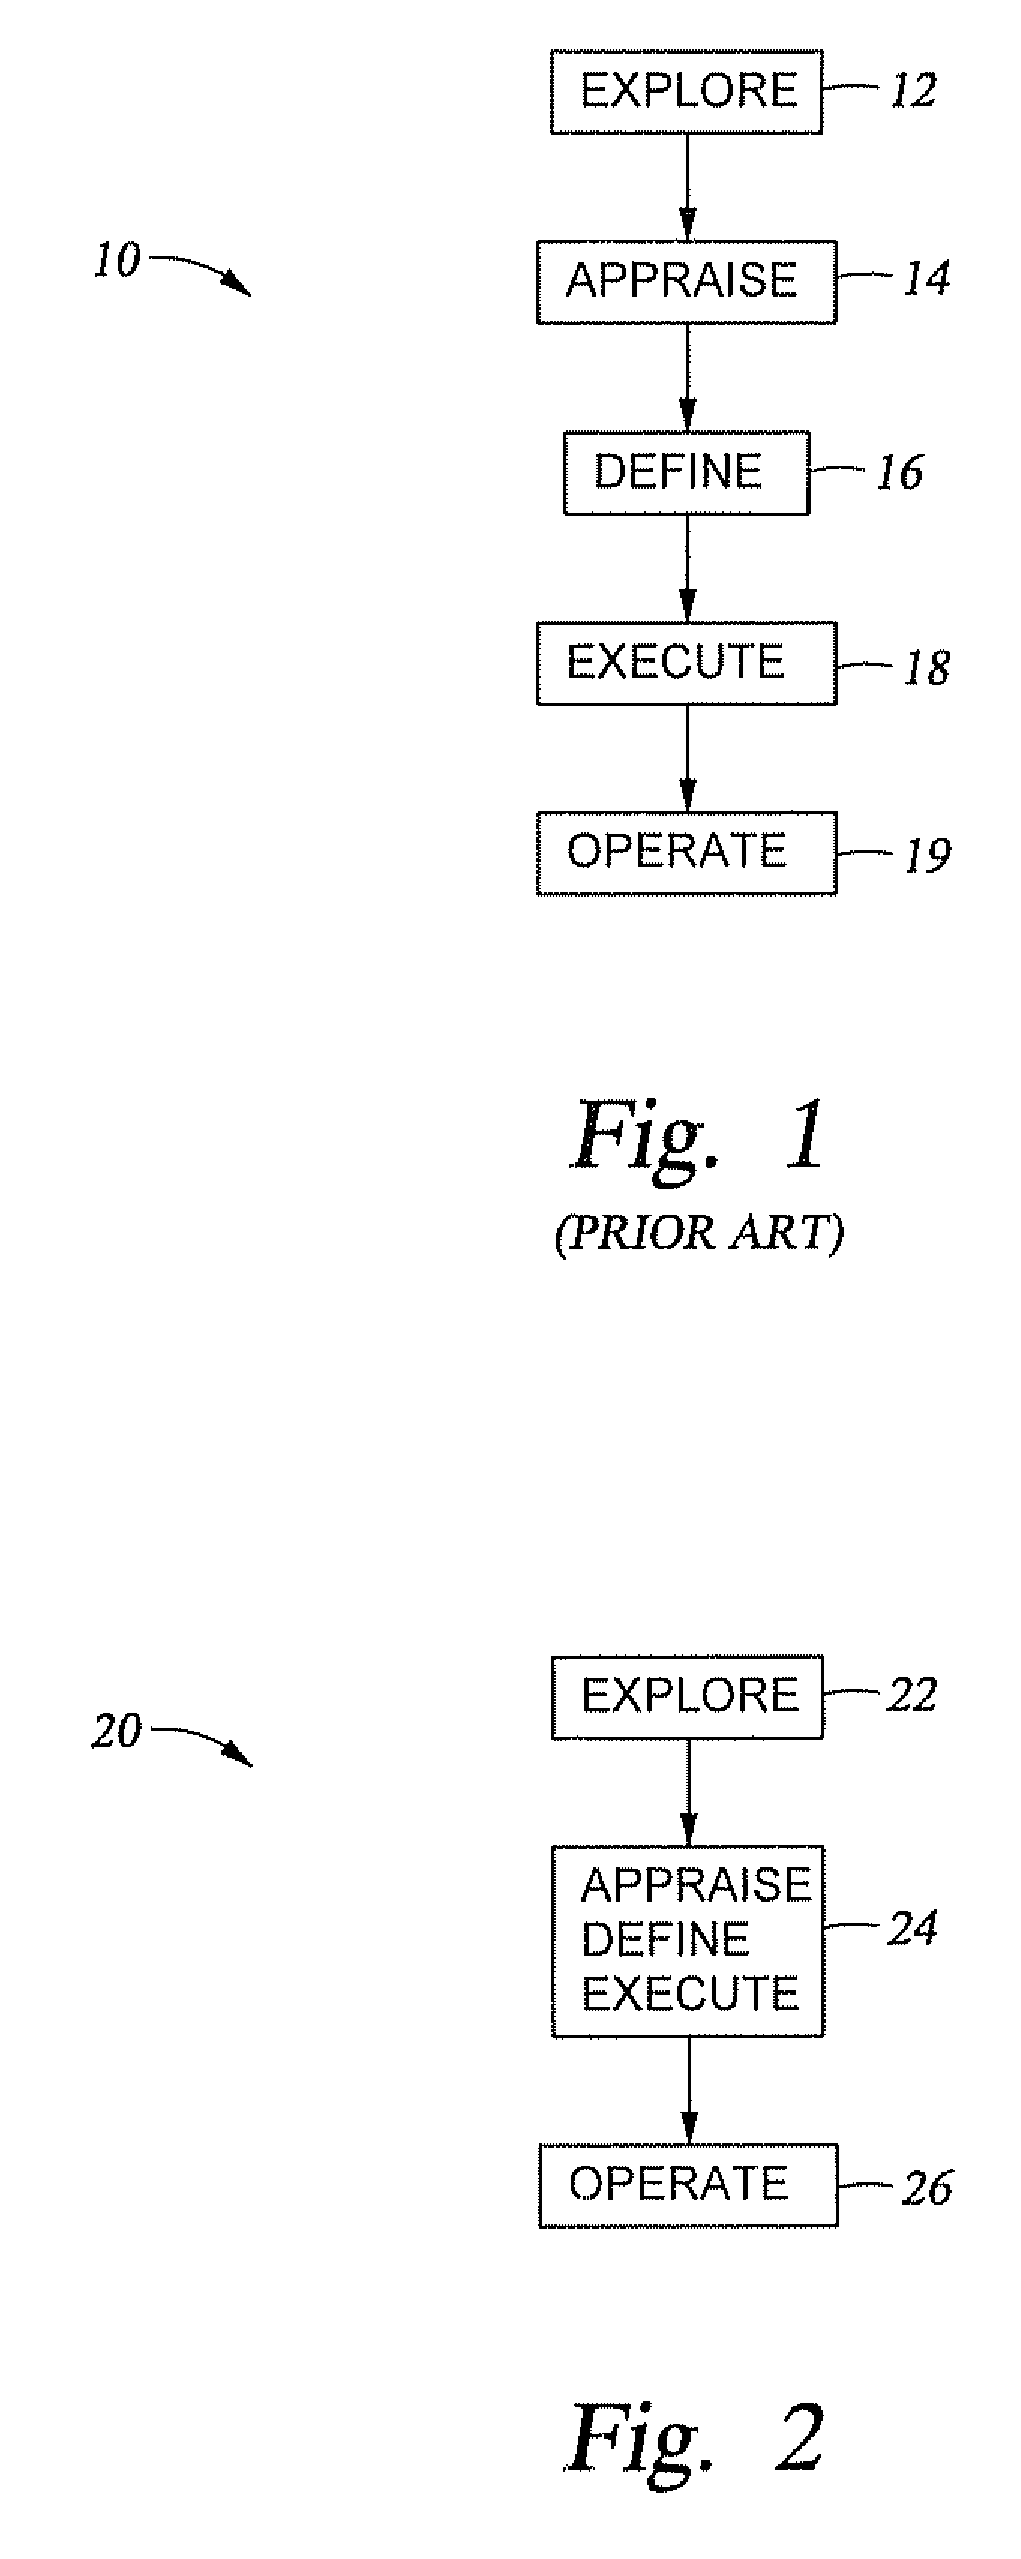 Methods for Development of an Offshore Oil and Gas Field